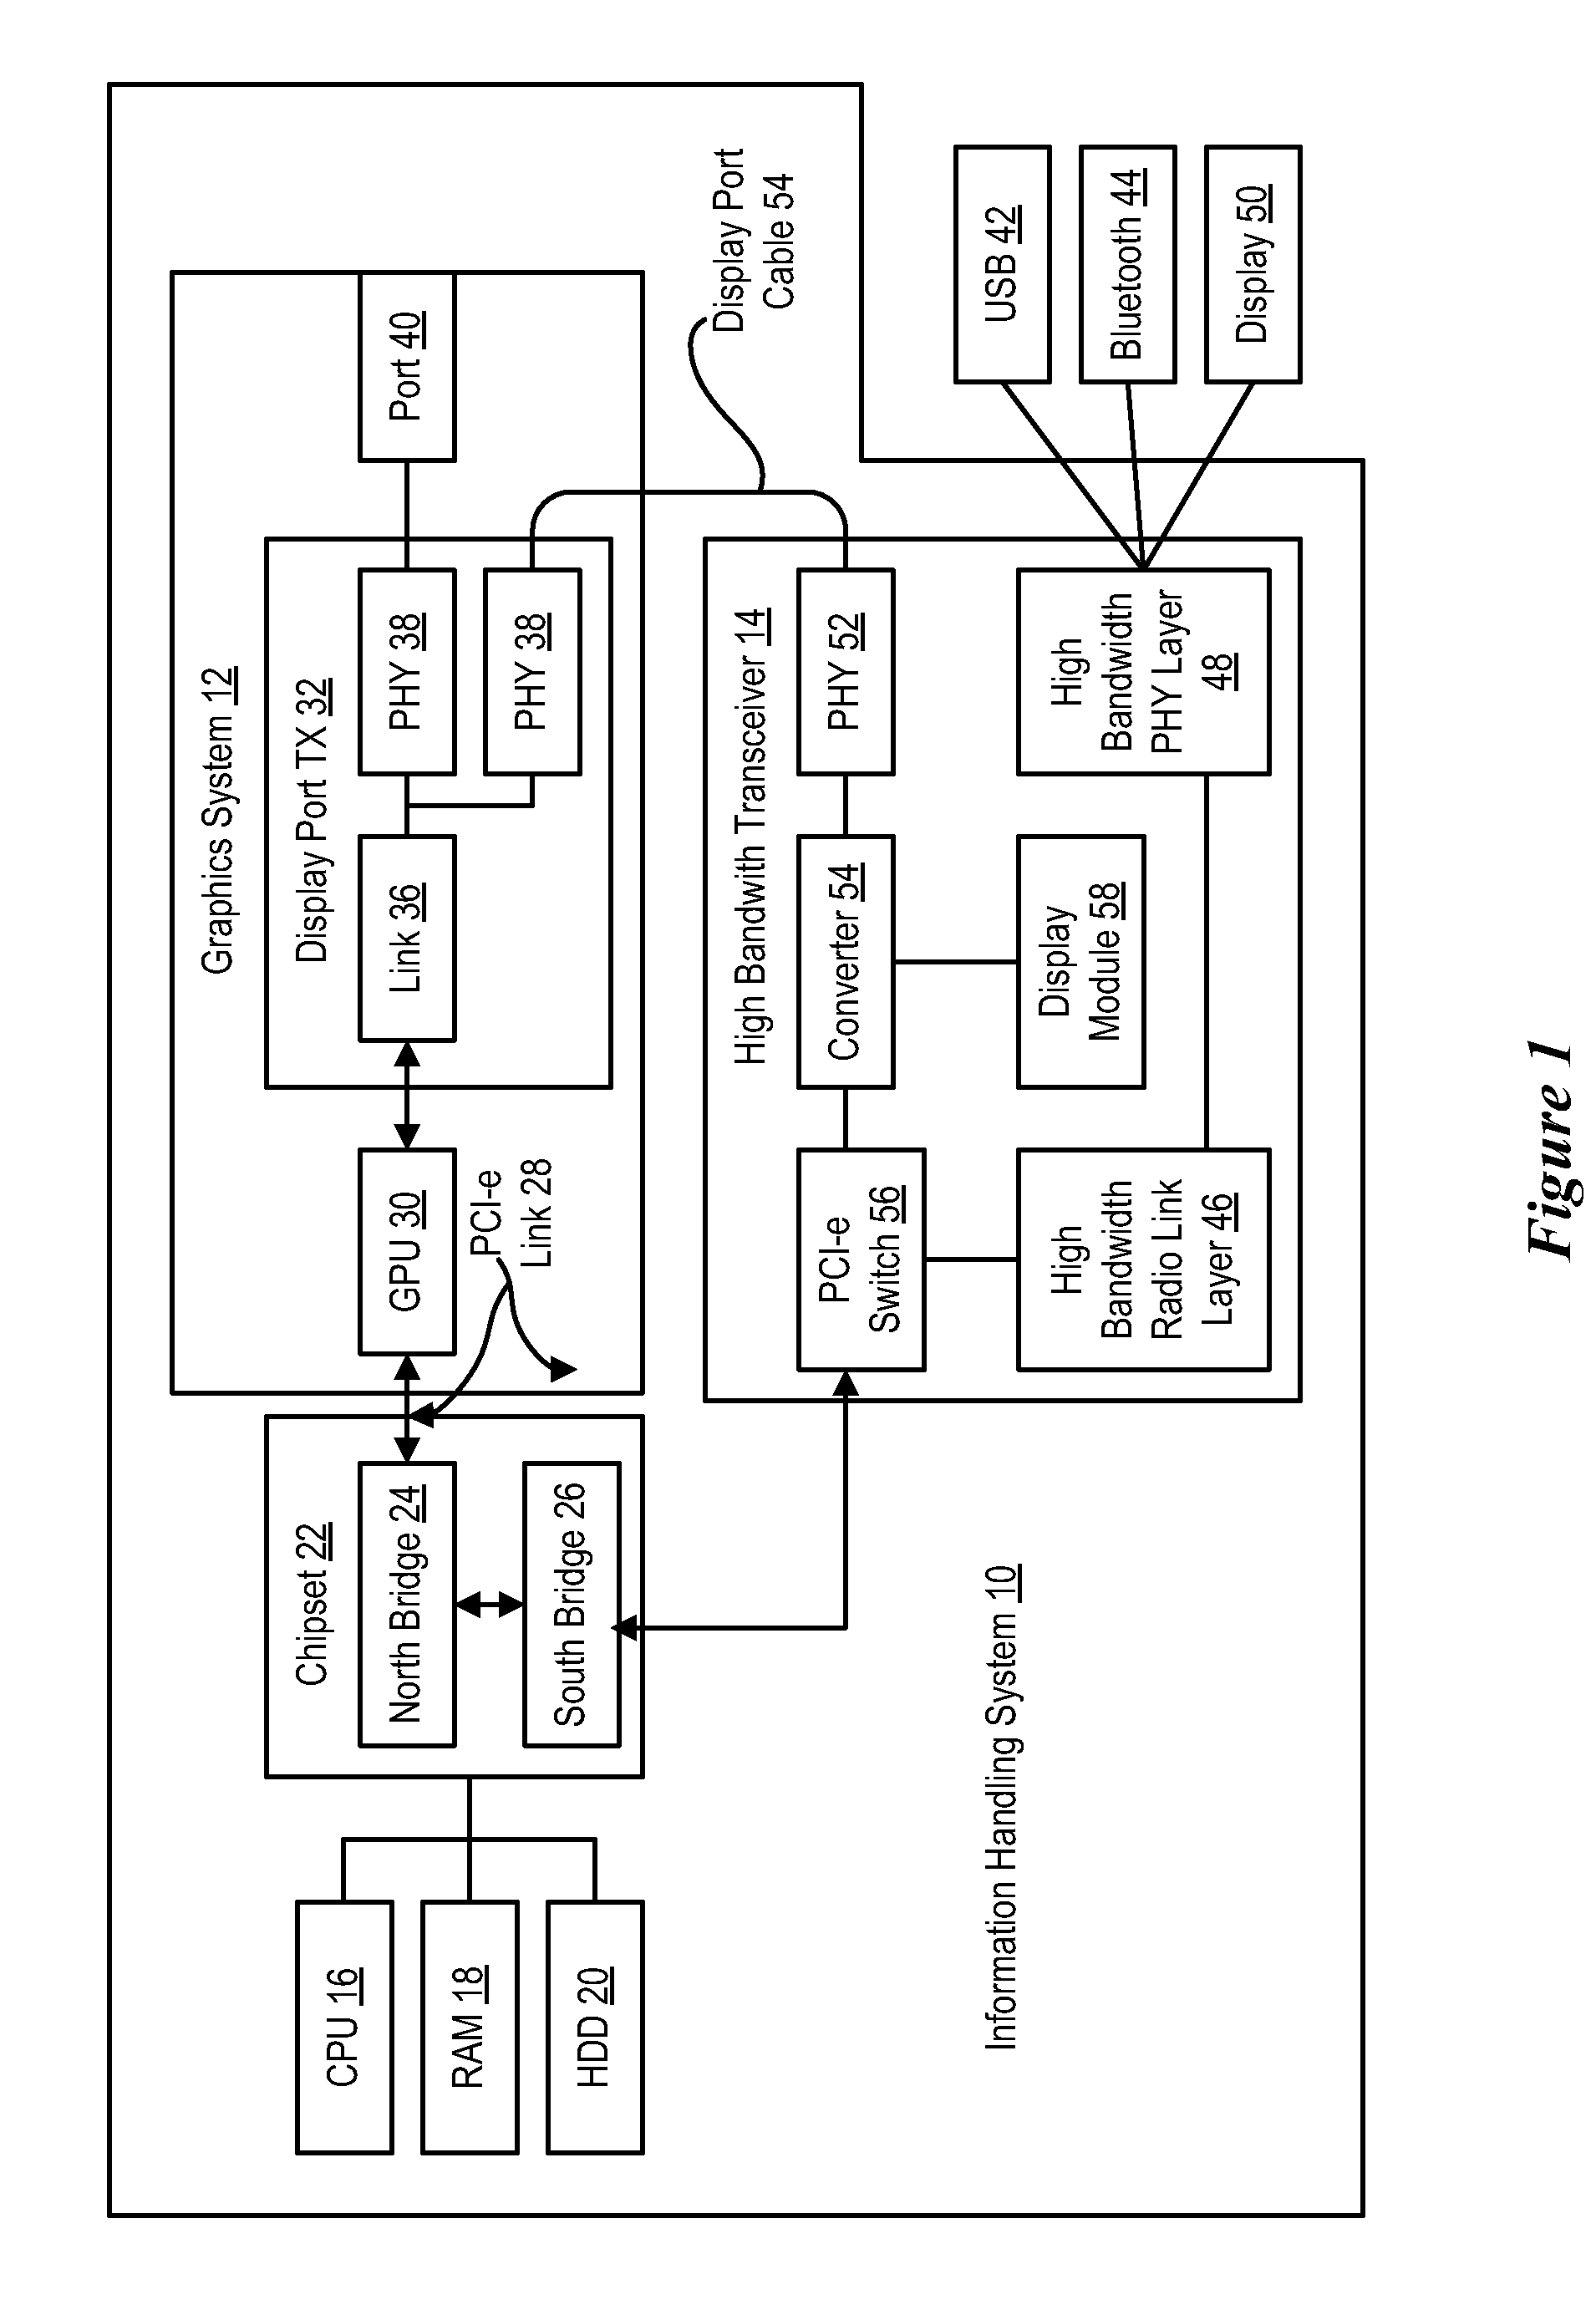 System and Method for Interfacing Graphical Information with an Information Handling System Wireless Transceiver